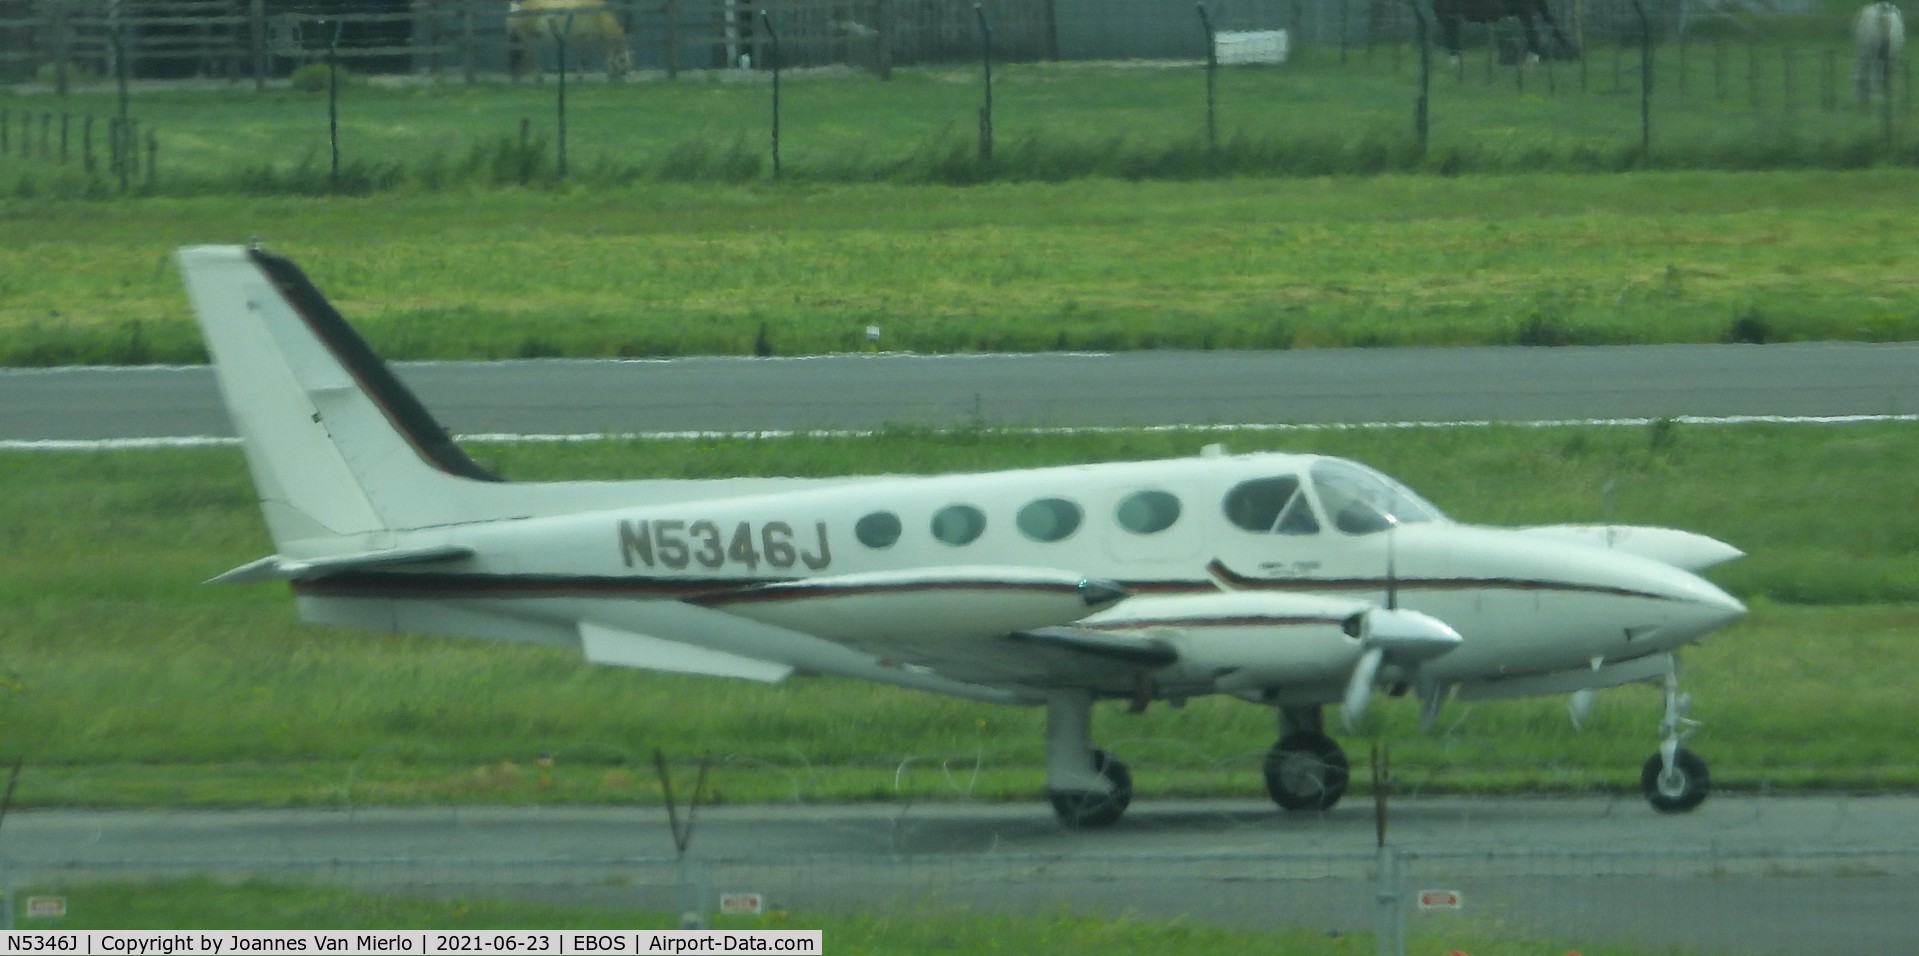 N5346J, 1977 Cessna 340A C/N 340A0419, Picture taken from the airport restaurant at Ostend